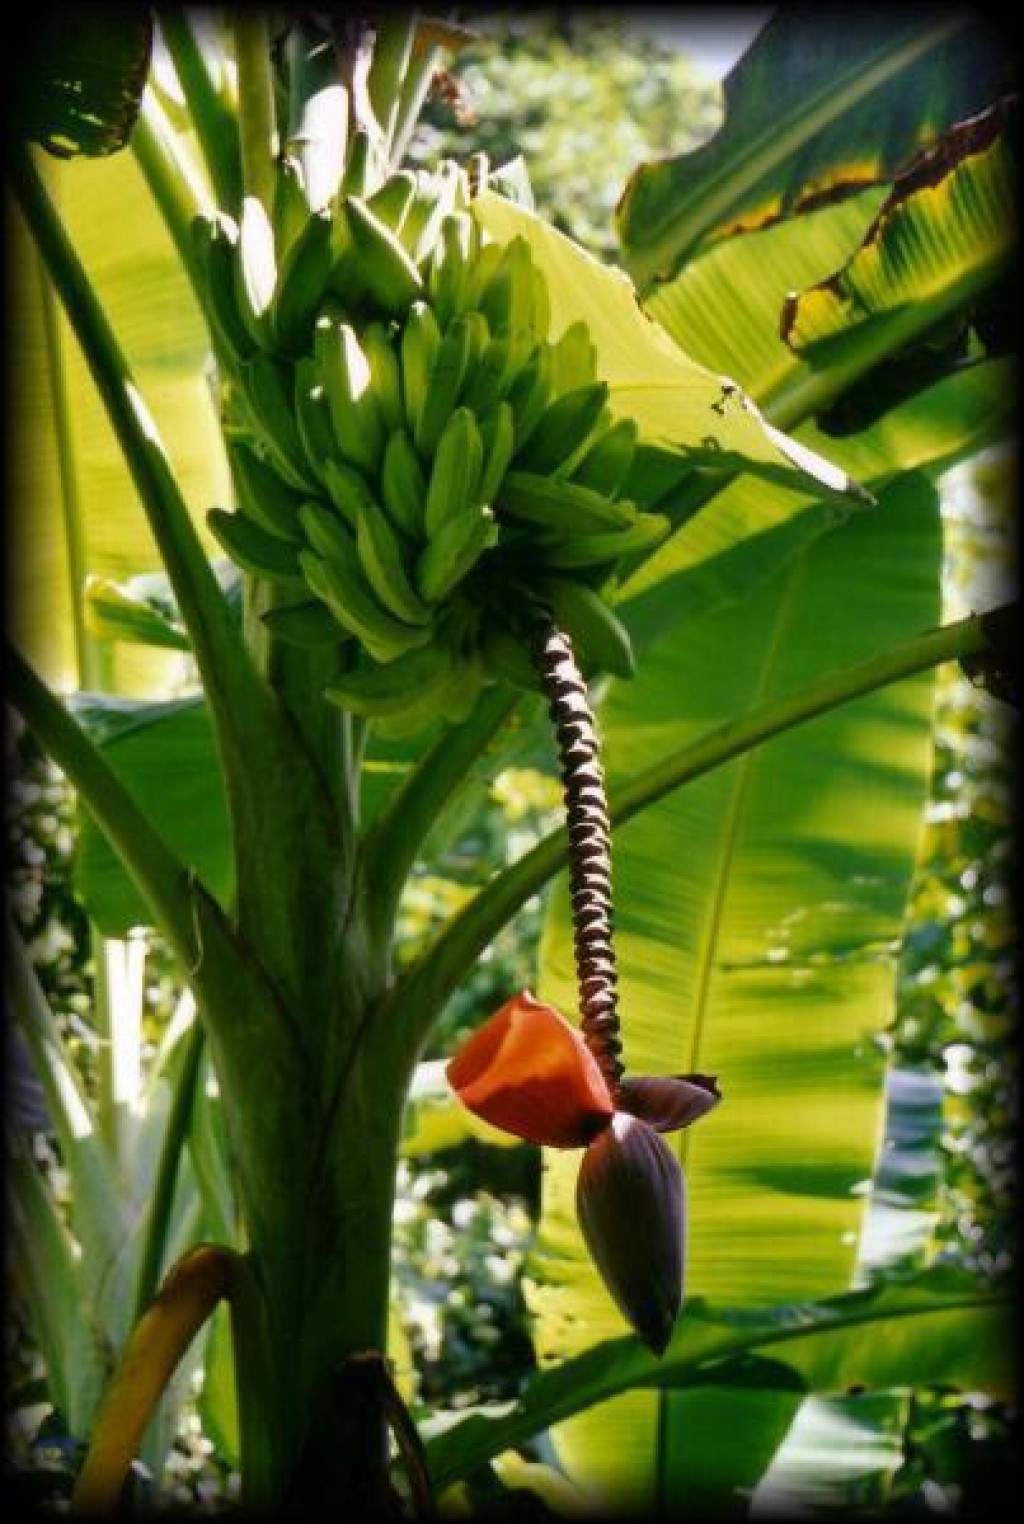 Who knew bananas started out life so pretty?